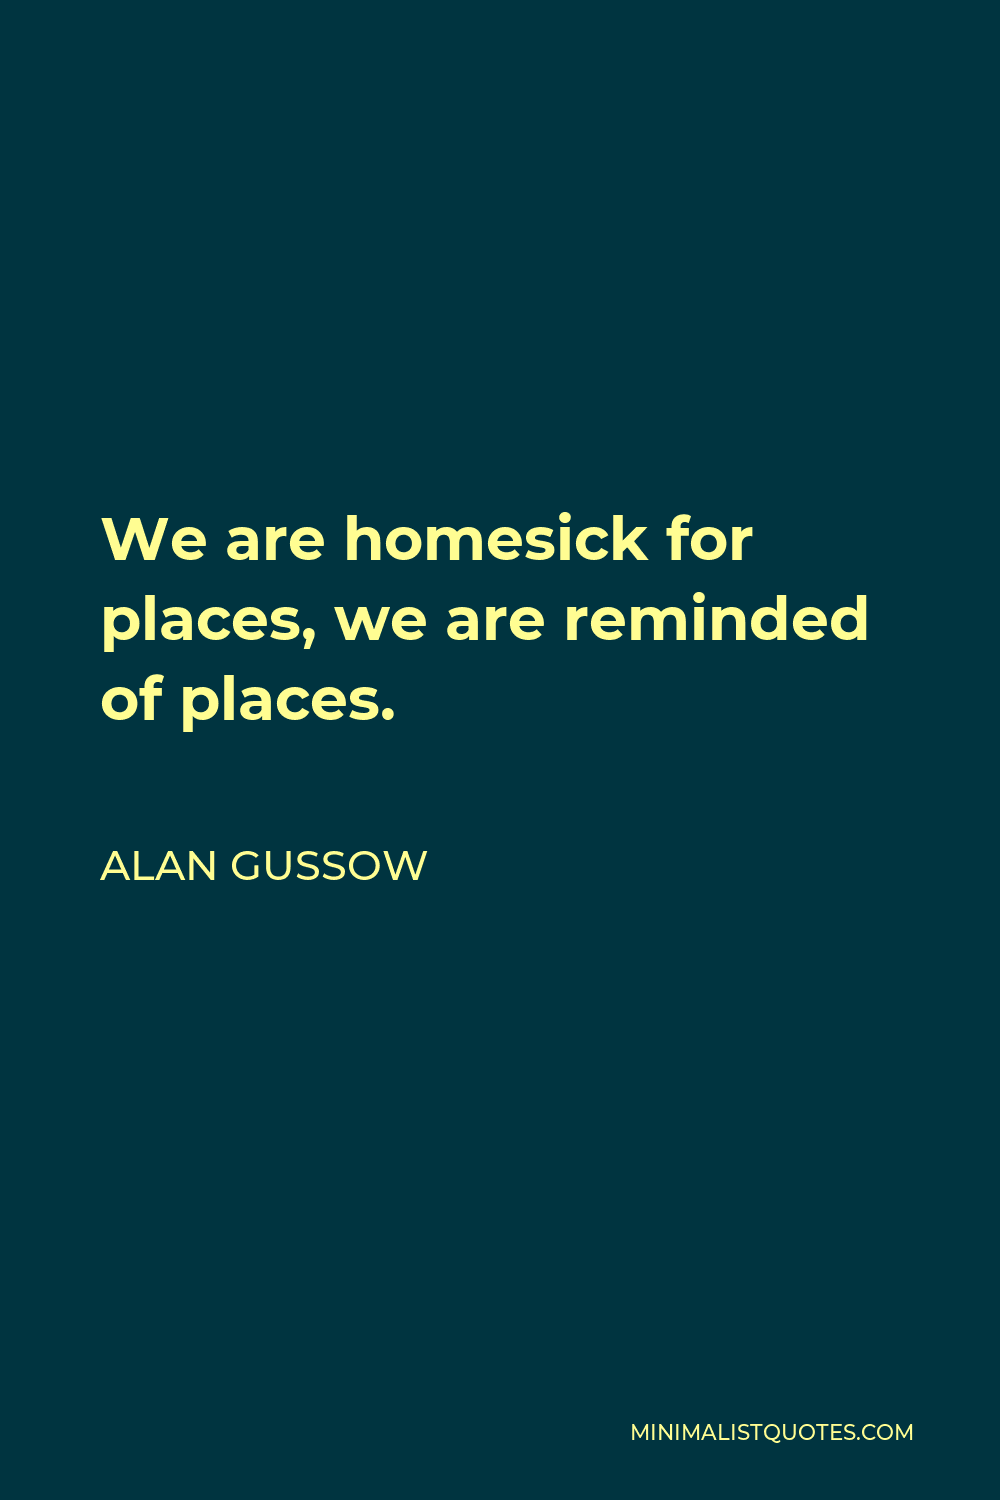 Alan Gussow Quote - We are homesick for places, we are reminded of places.